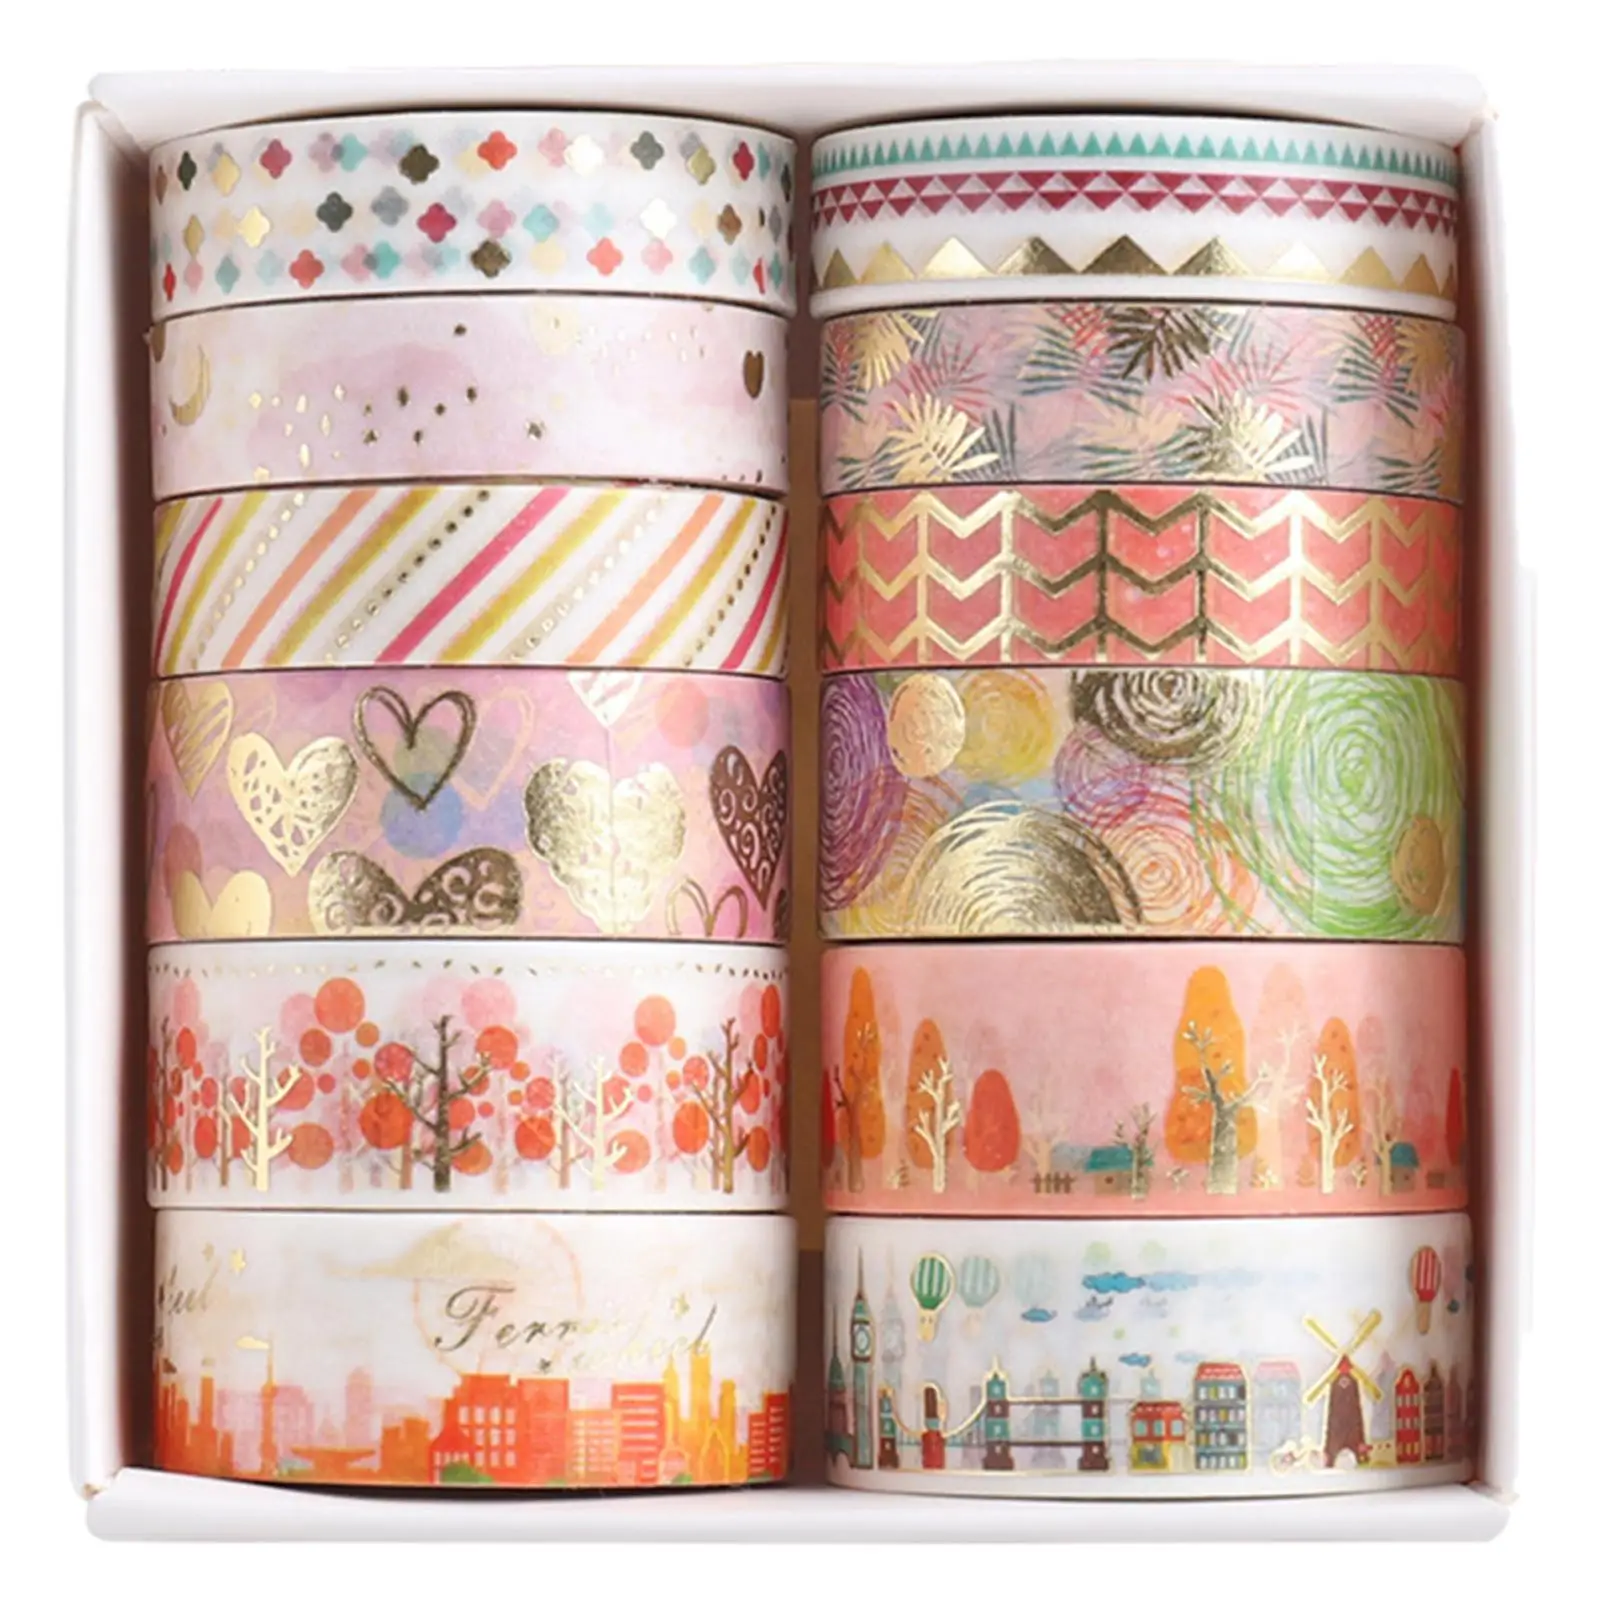 12 Rolls Washi Tape  Sticker Label for Stationery   Supplies Party Decorations Kids And dults